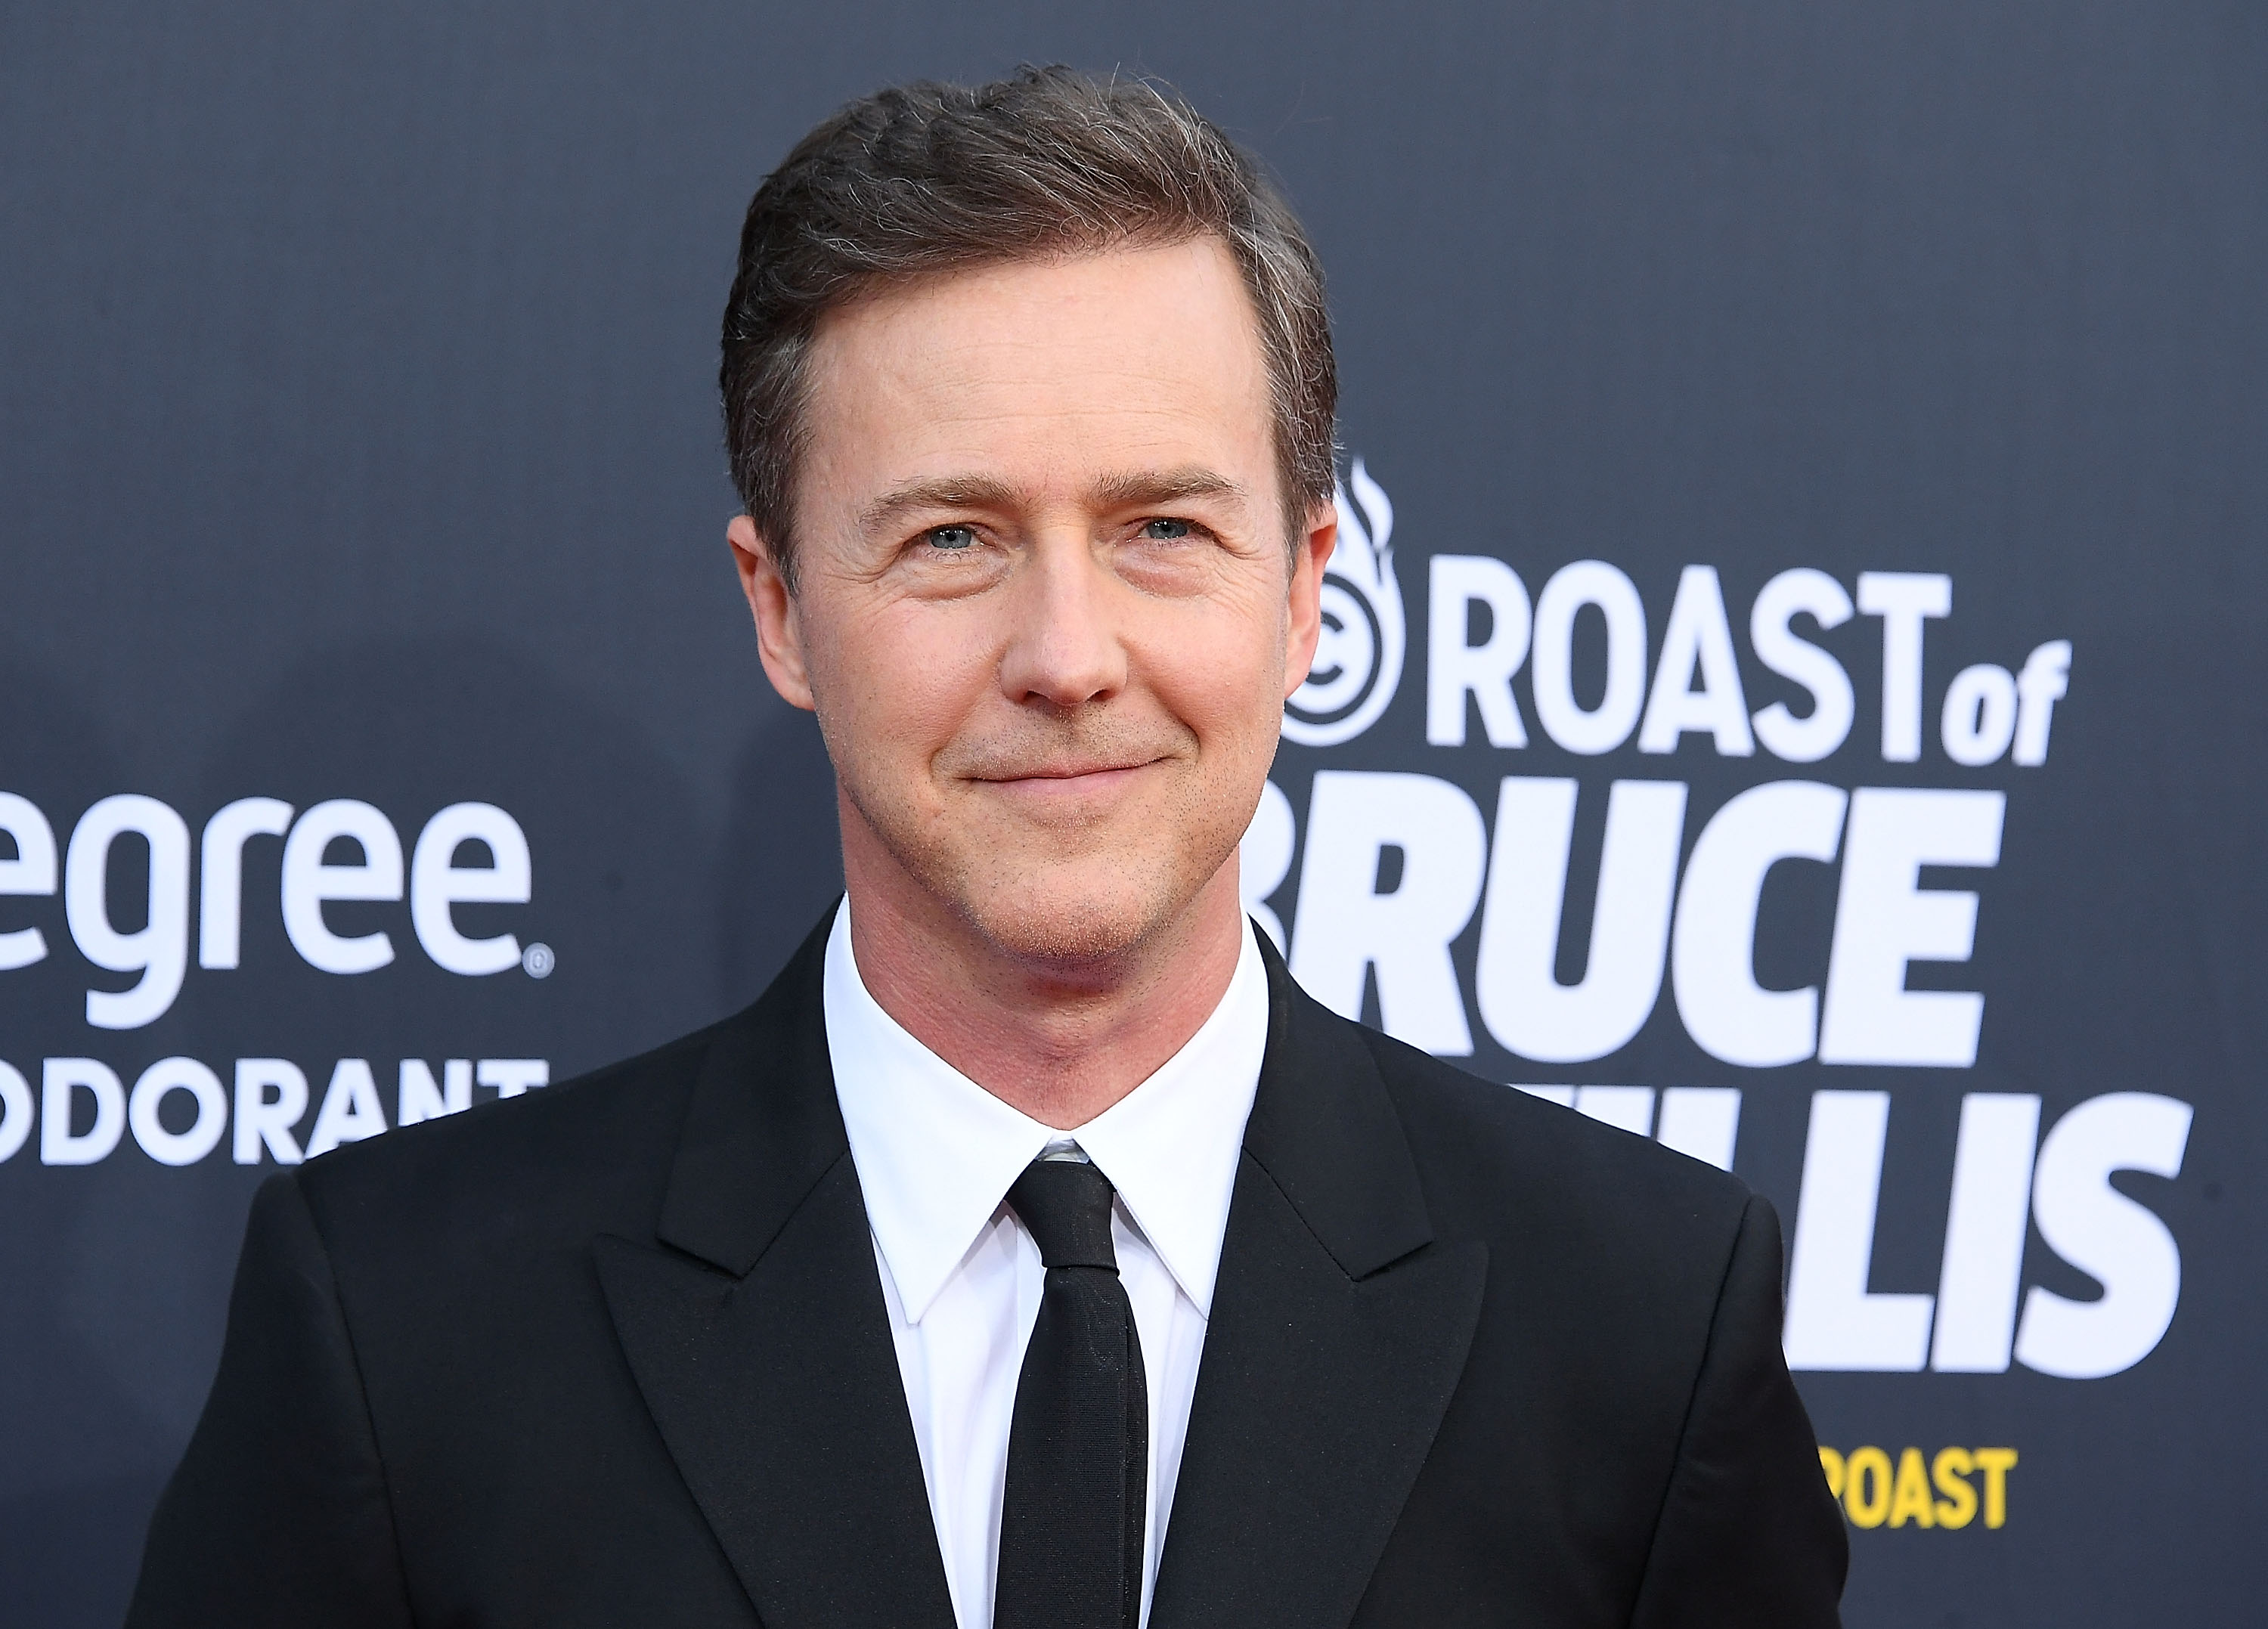 Edward Norton at the Comedy Central Roast Of Bruce Willis on July 14, 2018 in Los Angeles, California. (Steve Granitz—WireImage)